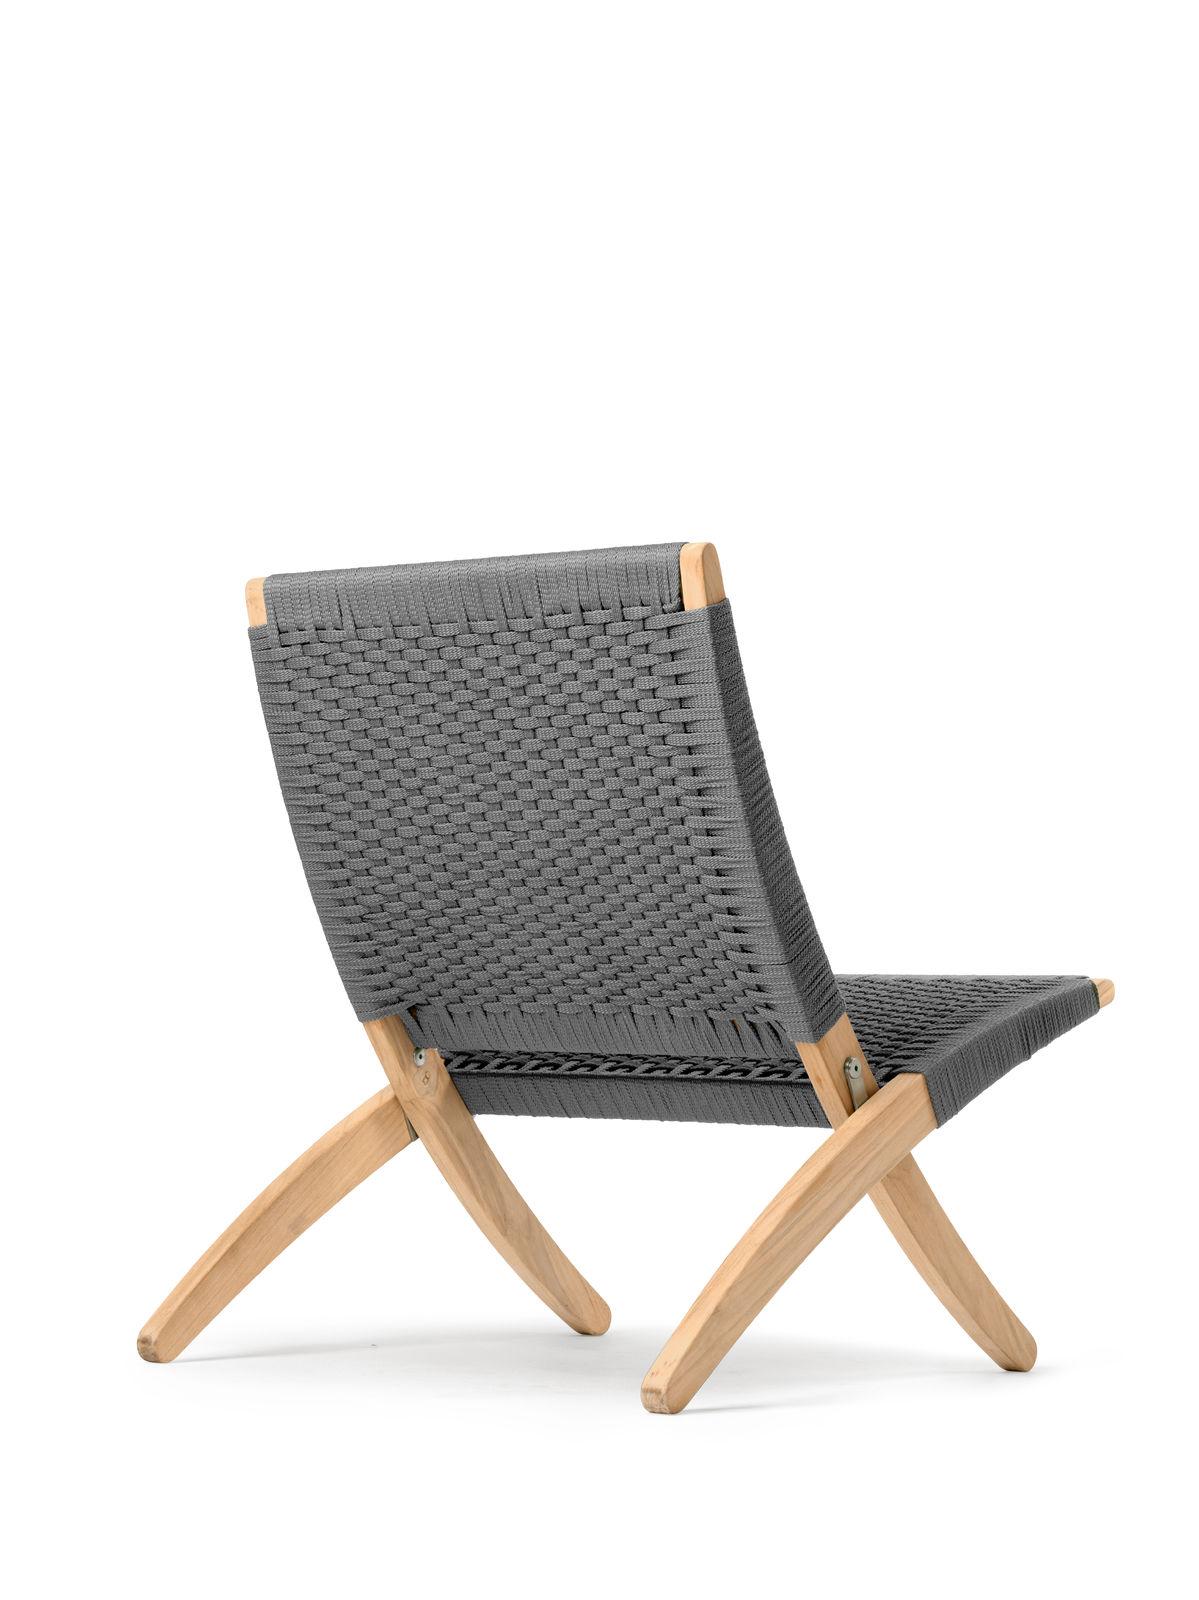 Designed by Morten Gøttler in 1997, the MG501 Cuba Chair captures contemporary design with its ideal balance of form and function, and nods to previous masters who experimented with elevating the folding chair concept.